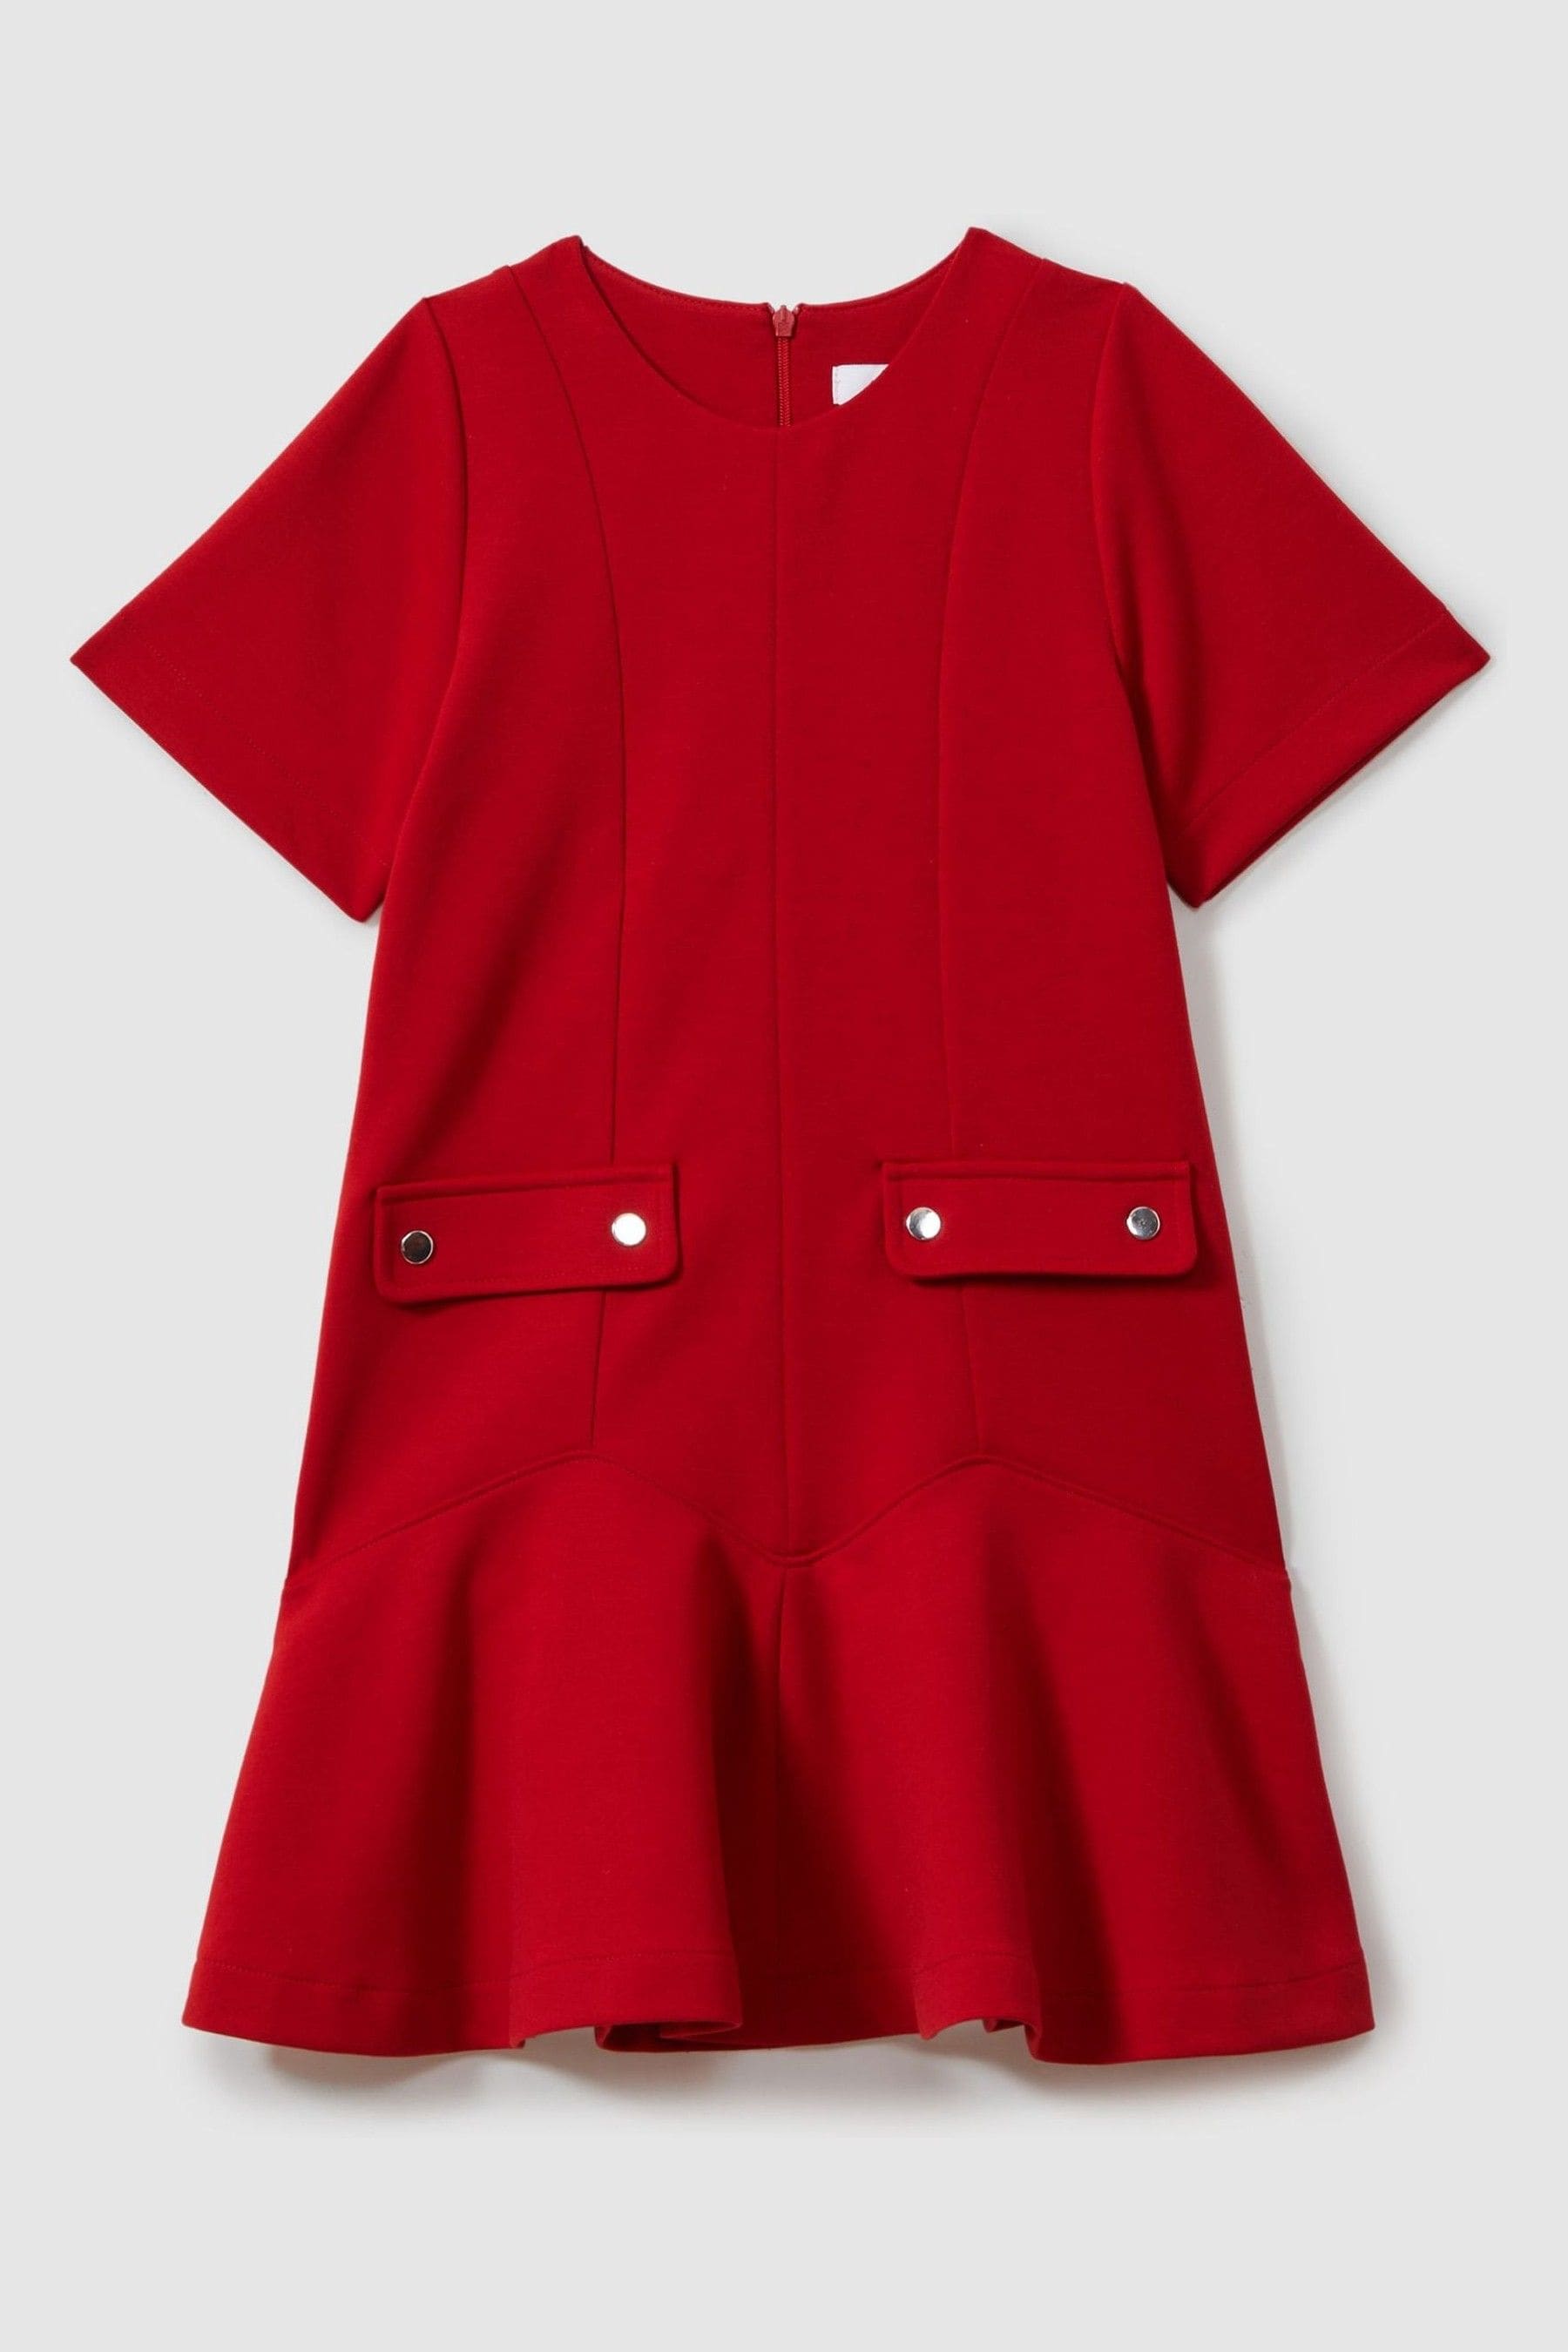 Reiss Fion - Red Teen Fit-and-flare Pocket Detail Dress, Uk 13-14 Yrs